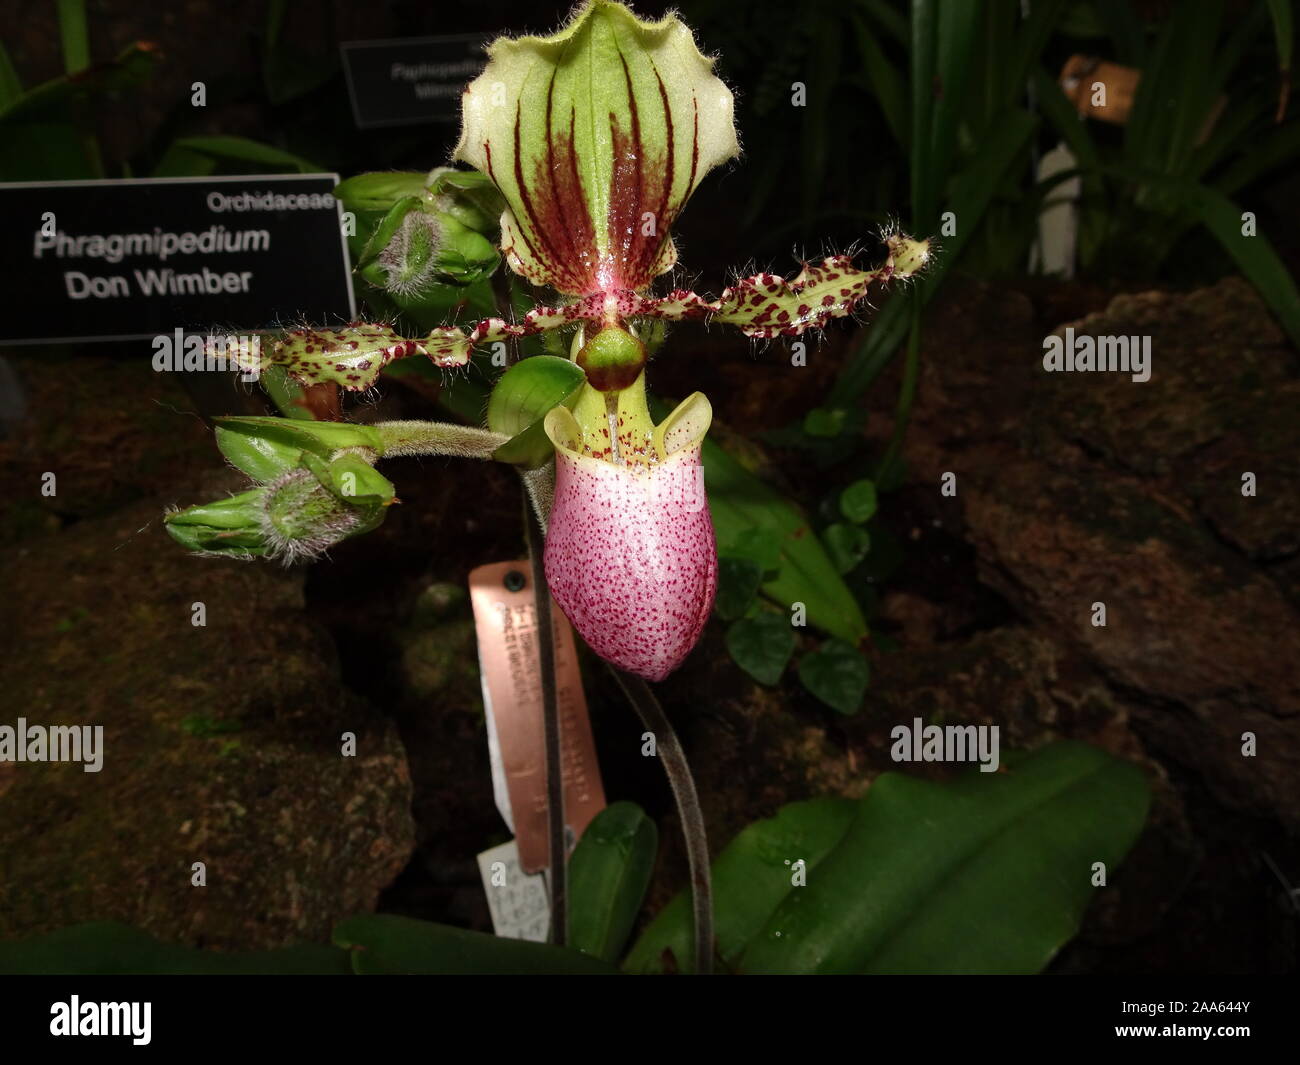 Exotic Don Wilber Paphiopedilum lady slipper orchid Stock Photo